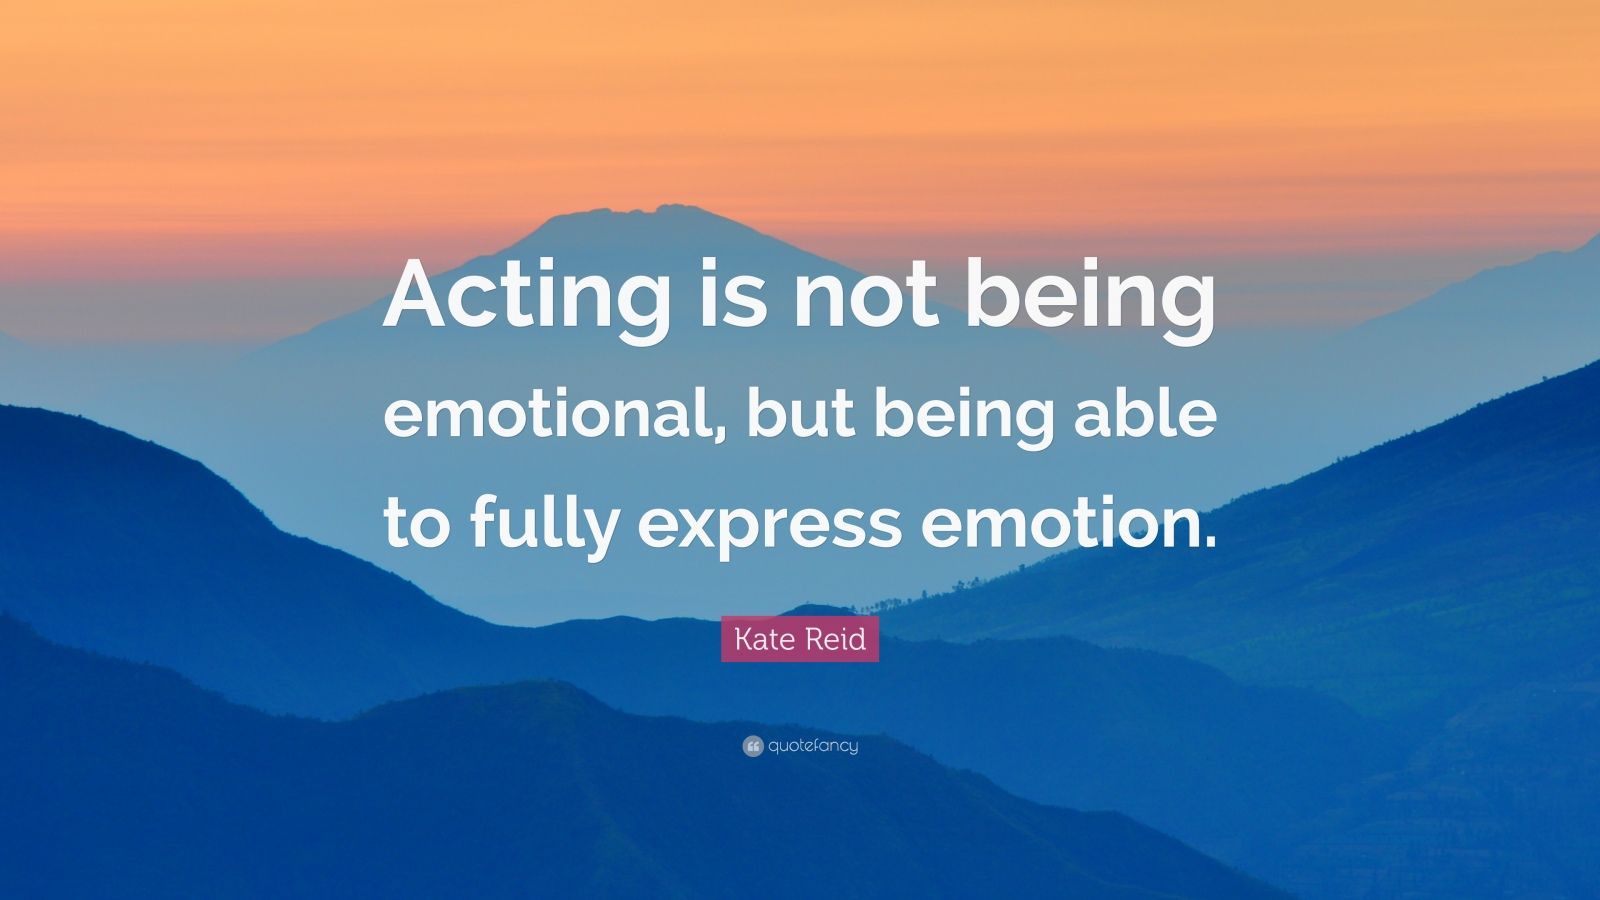 Kate Reid Quote: “Acting is not being emotional, but being able to ...